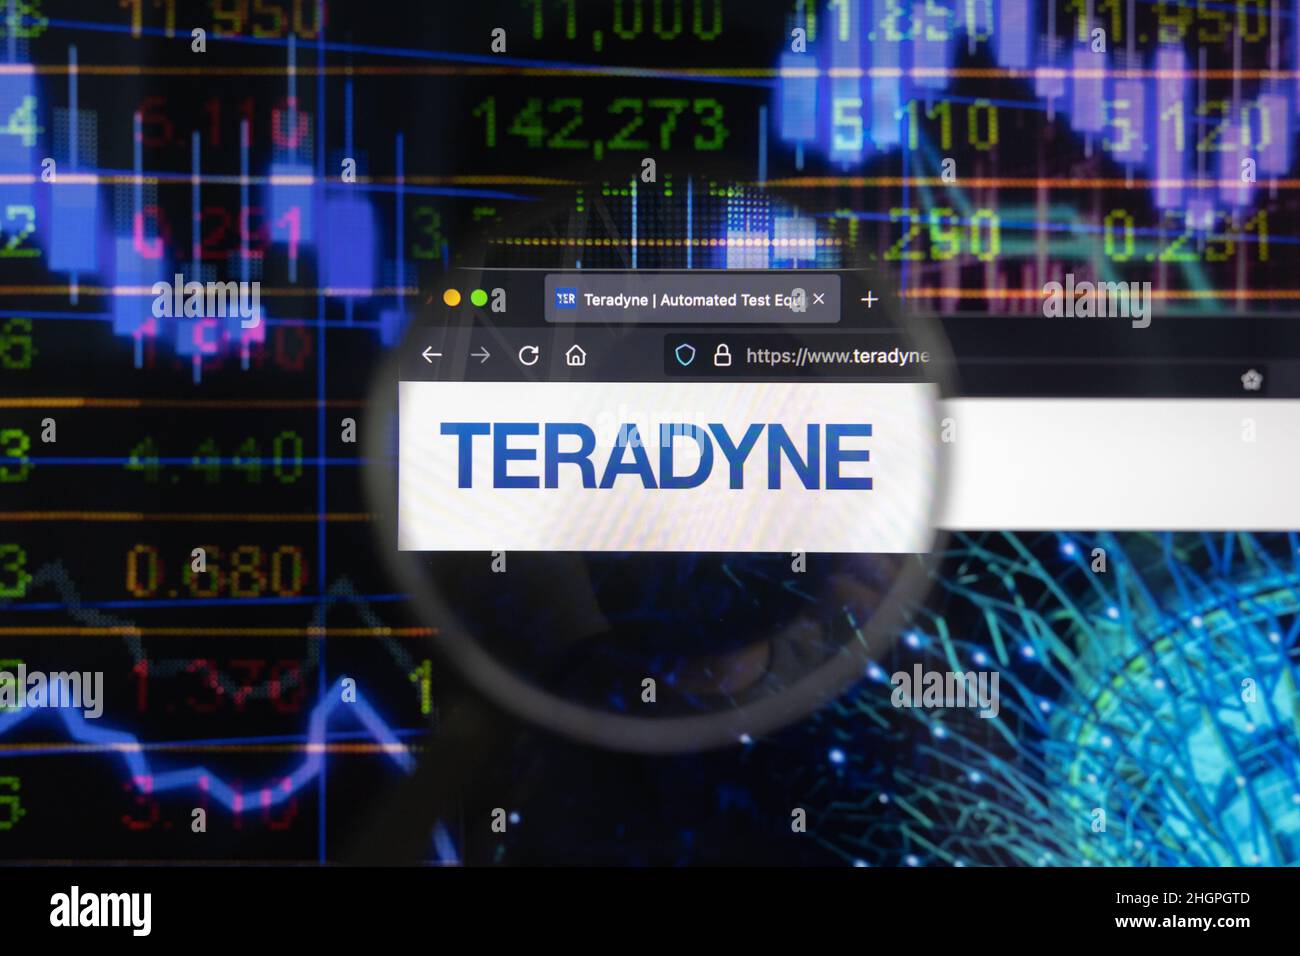 Teradyne company logo on a website with blurry stock market developments in the background, seen on a computer screen through a magnifying glass. Stock Photo